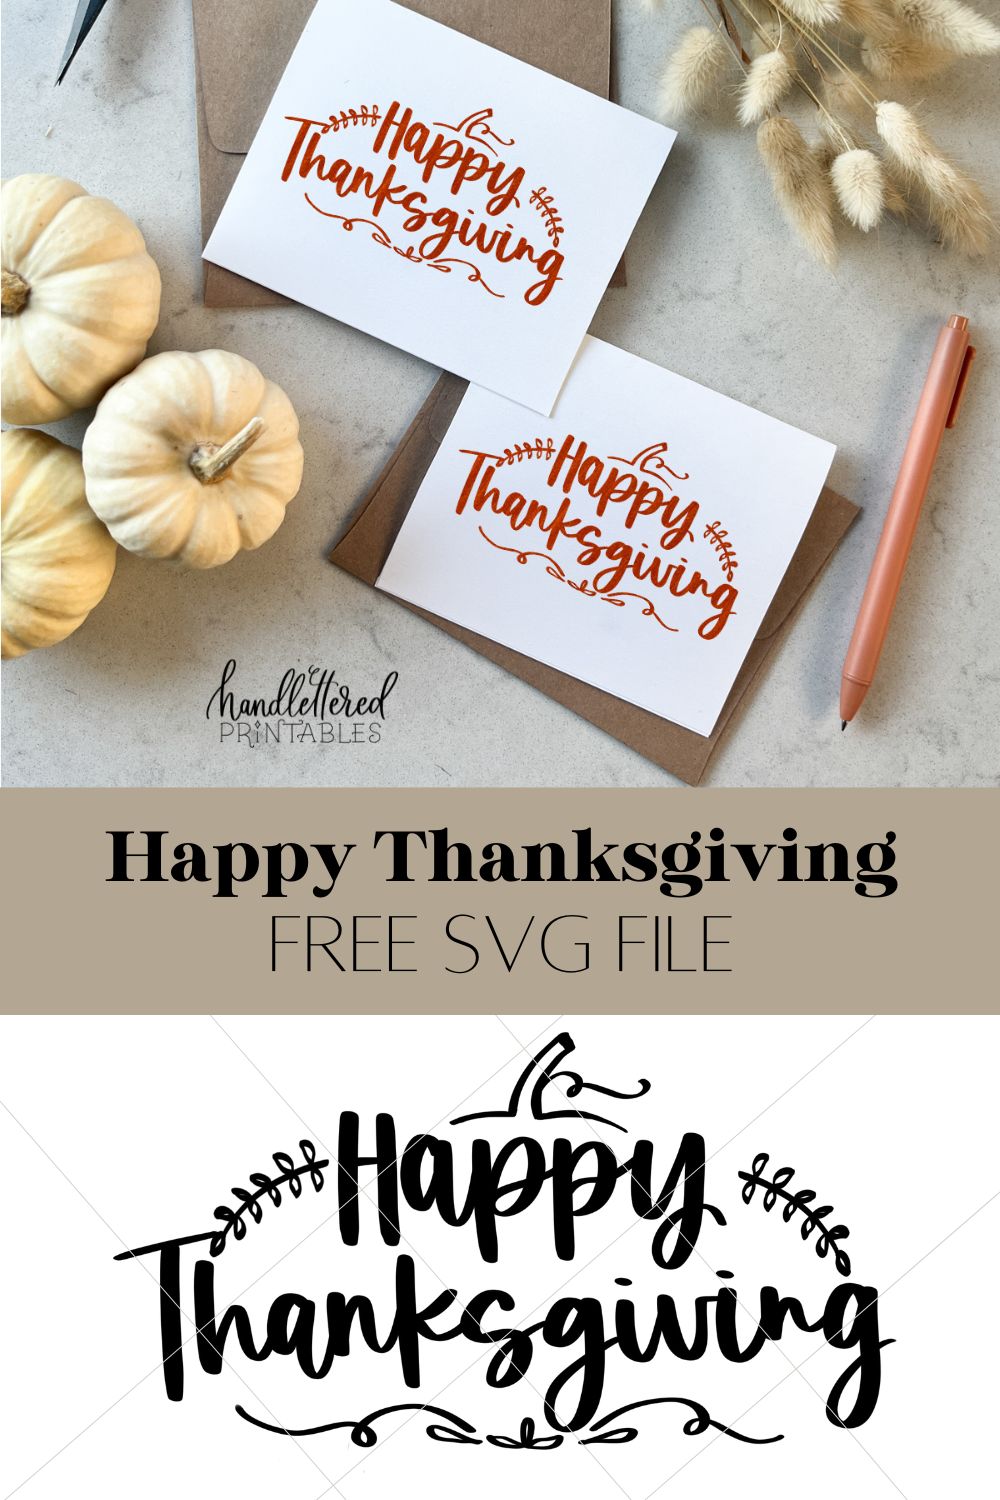 Happy Thanksgiving Free SVG file (shown used on cards)